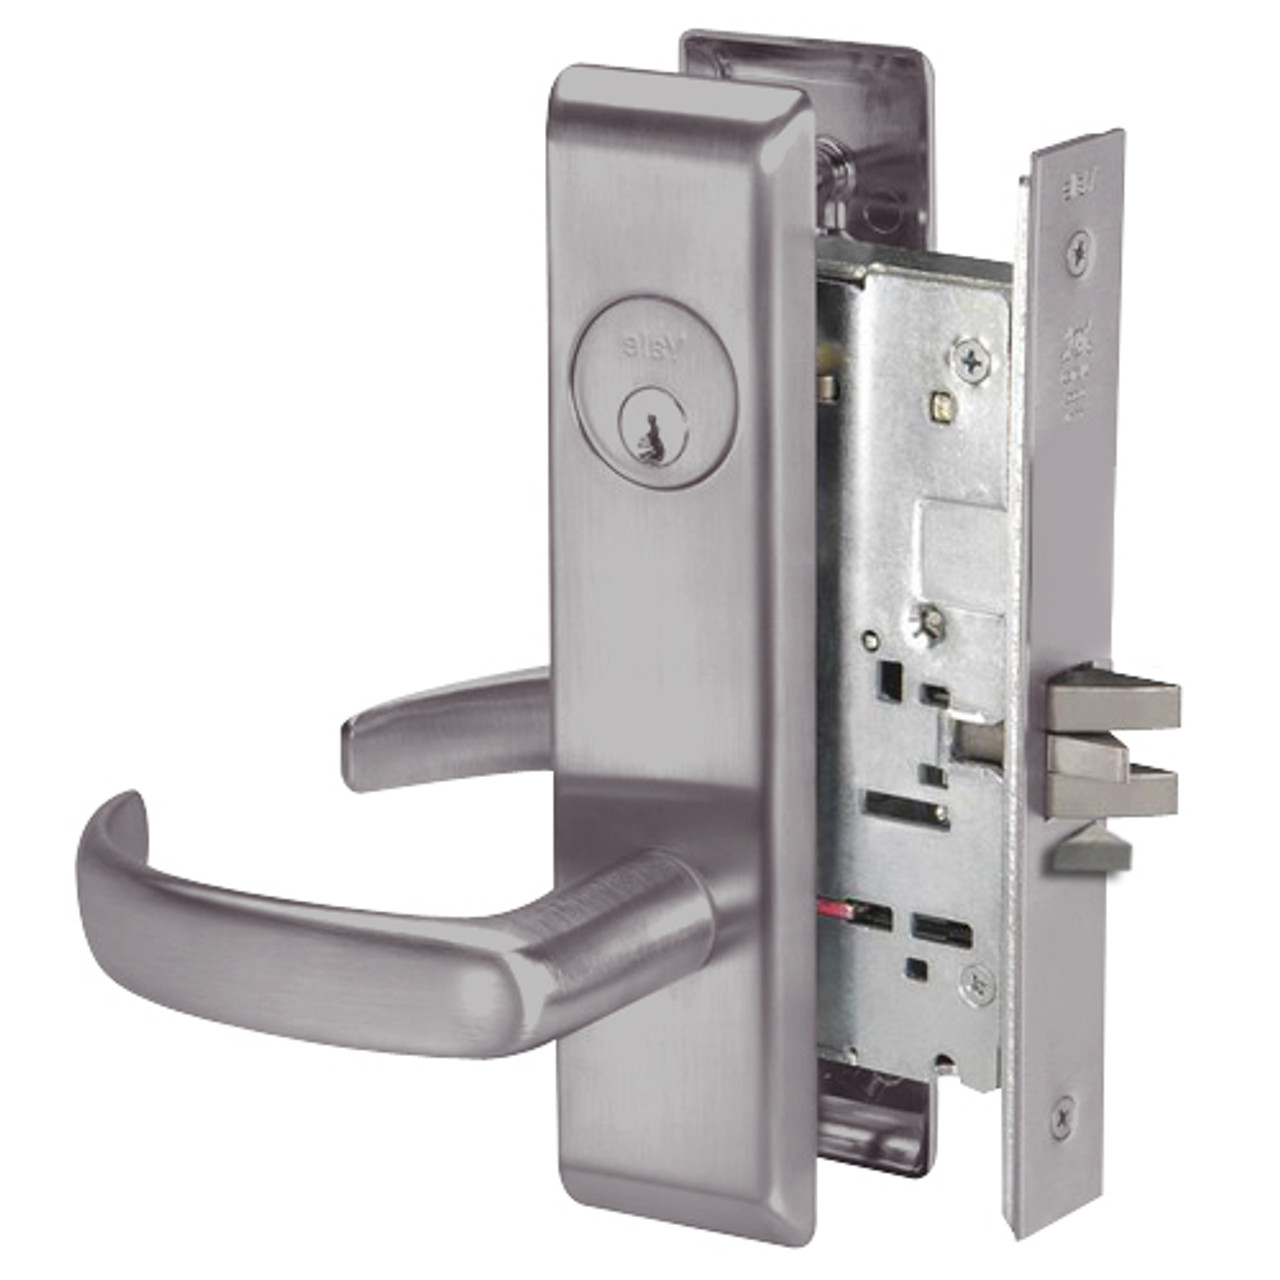 PBCN8864FL-630 Yale 8800FL Series Single Cylinder Mortise Bathroom Lock with Indicator with Pacific Beach Lever in Satin Stainless Steel